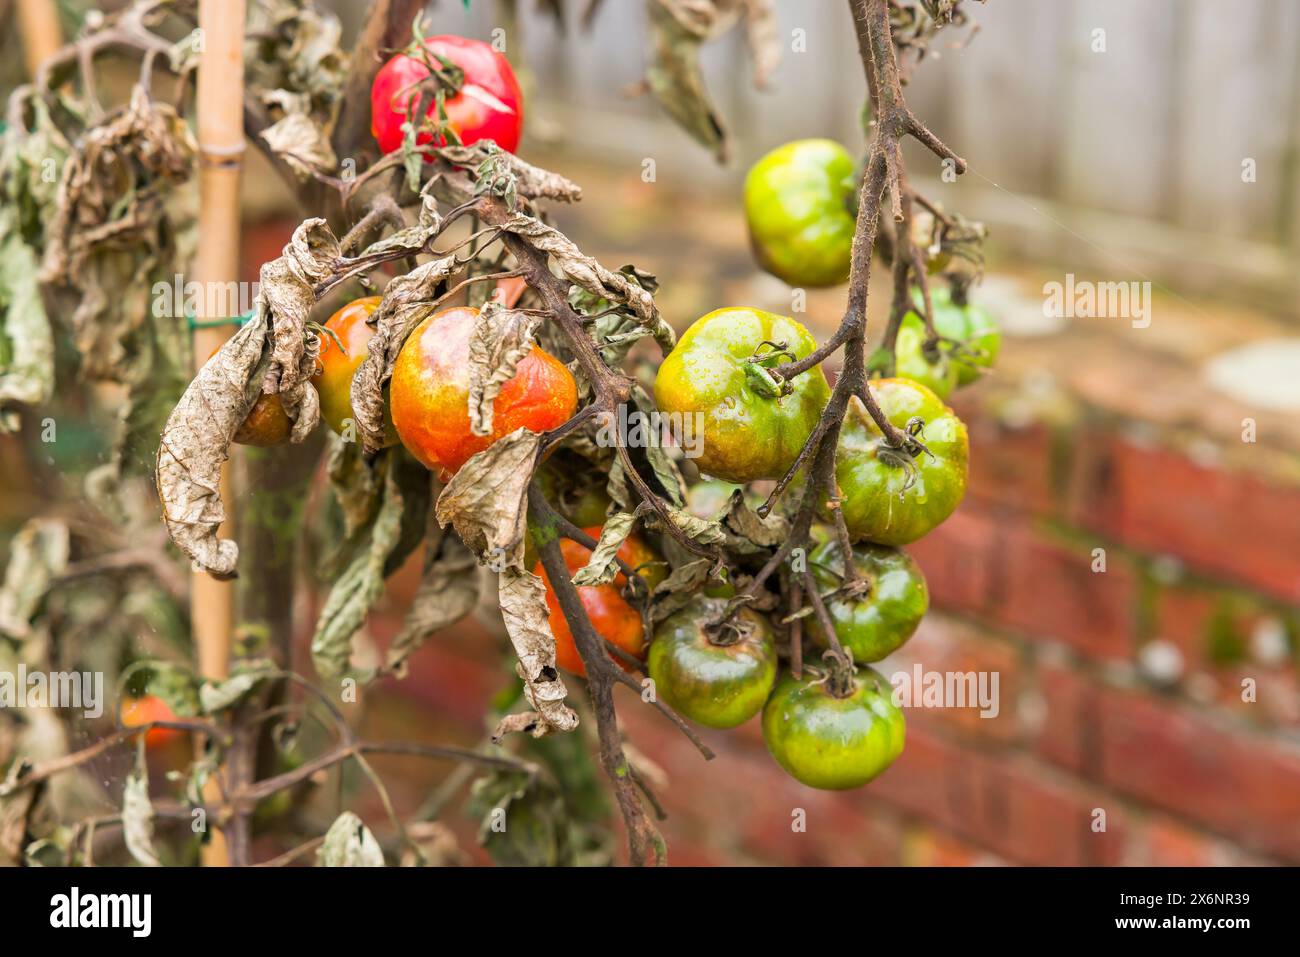 Tomato problems. Close-up of tomato blight, (phytophthora infestans), plants with wilted leaves Stock Photo